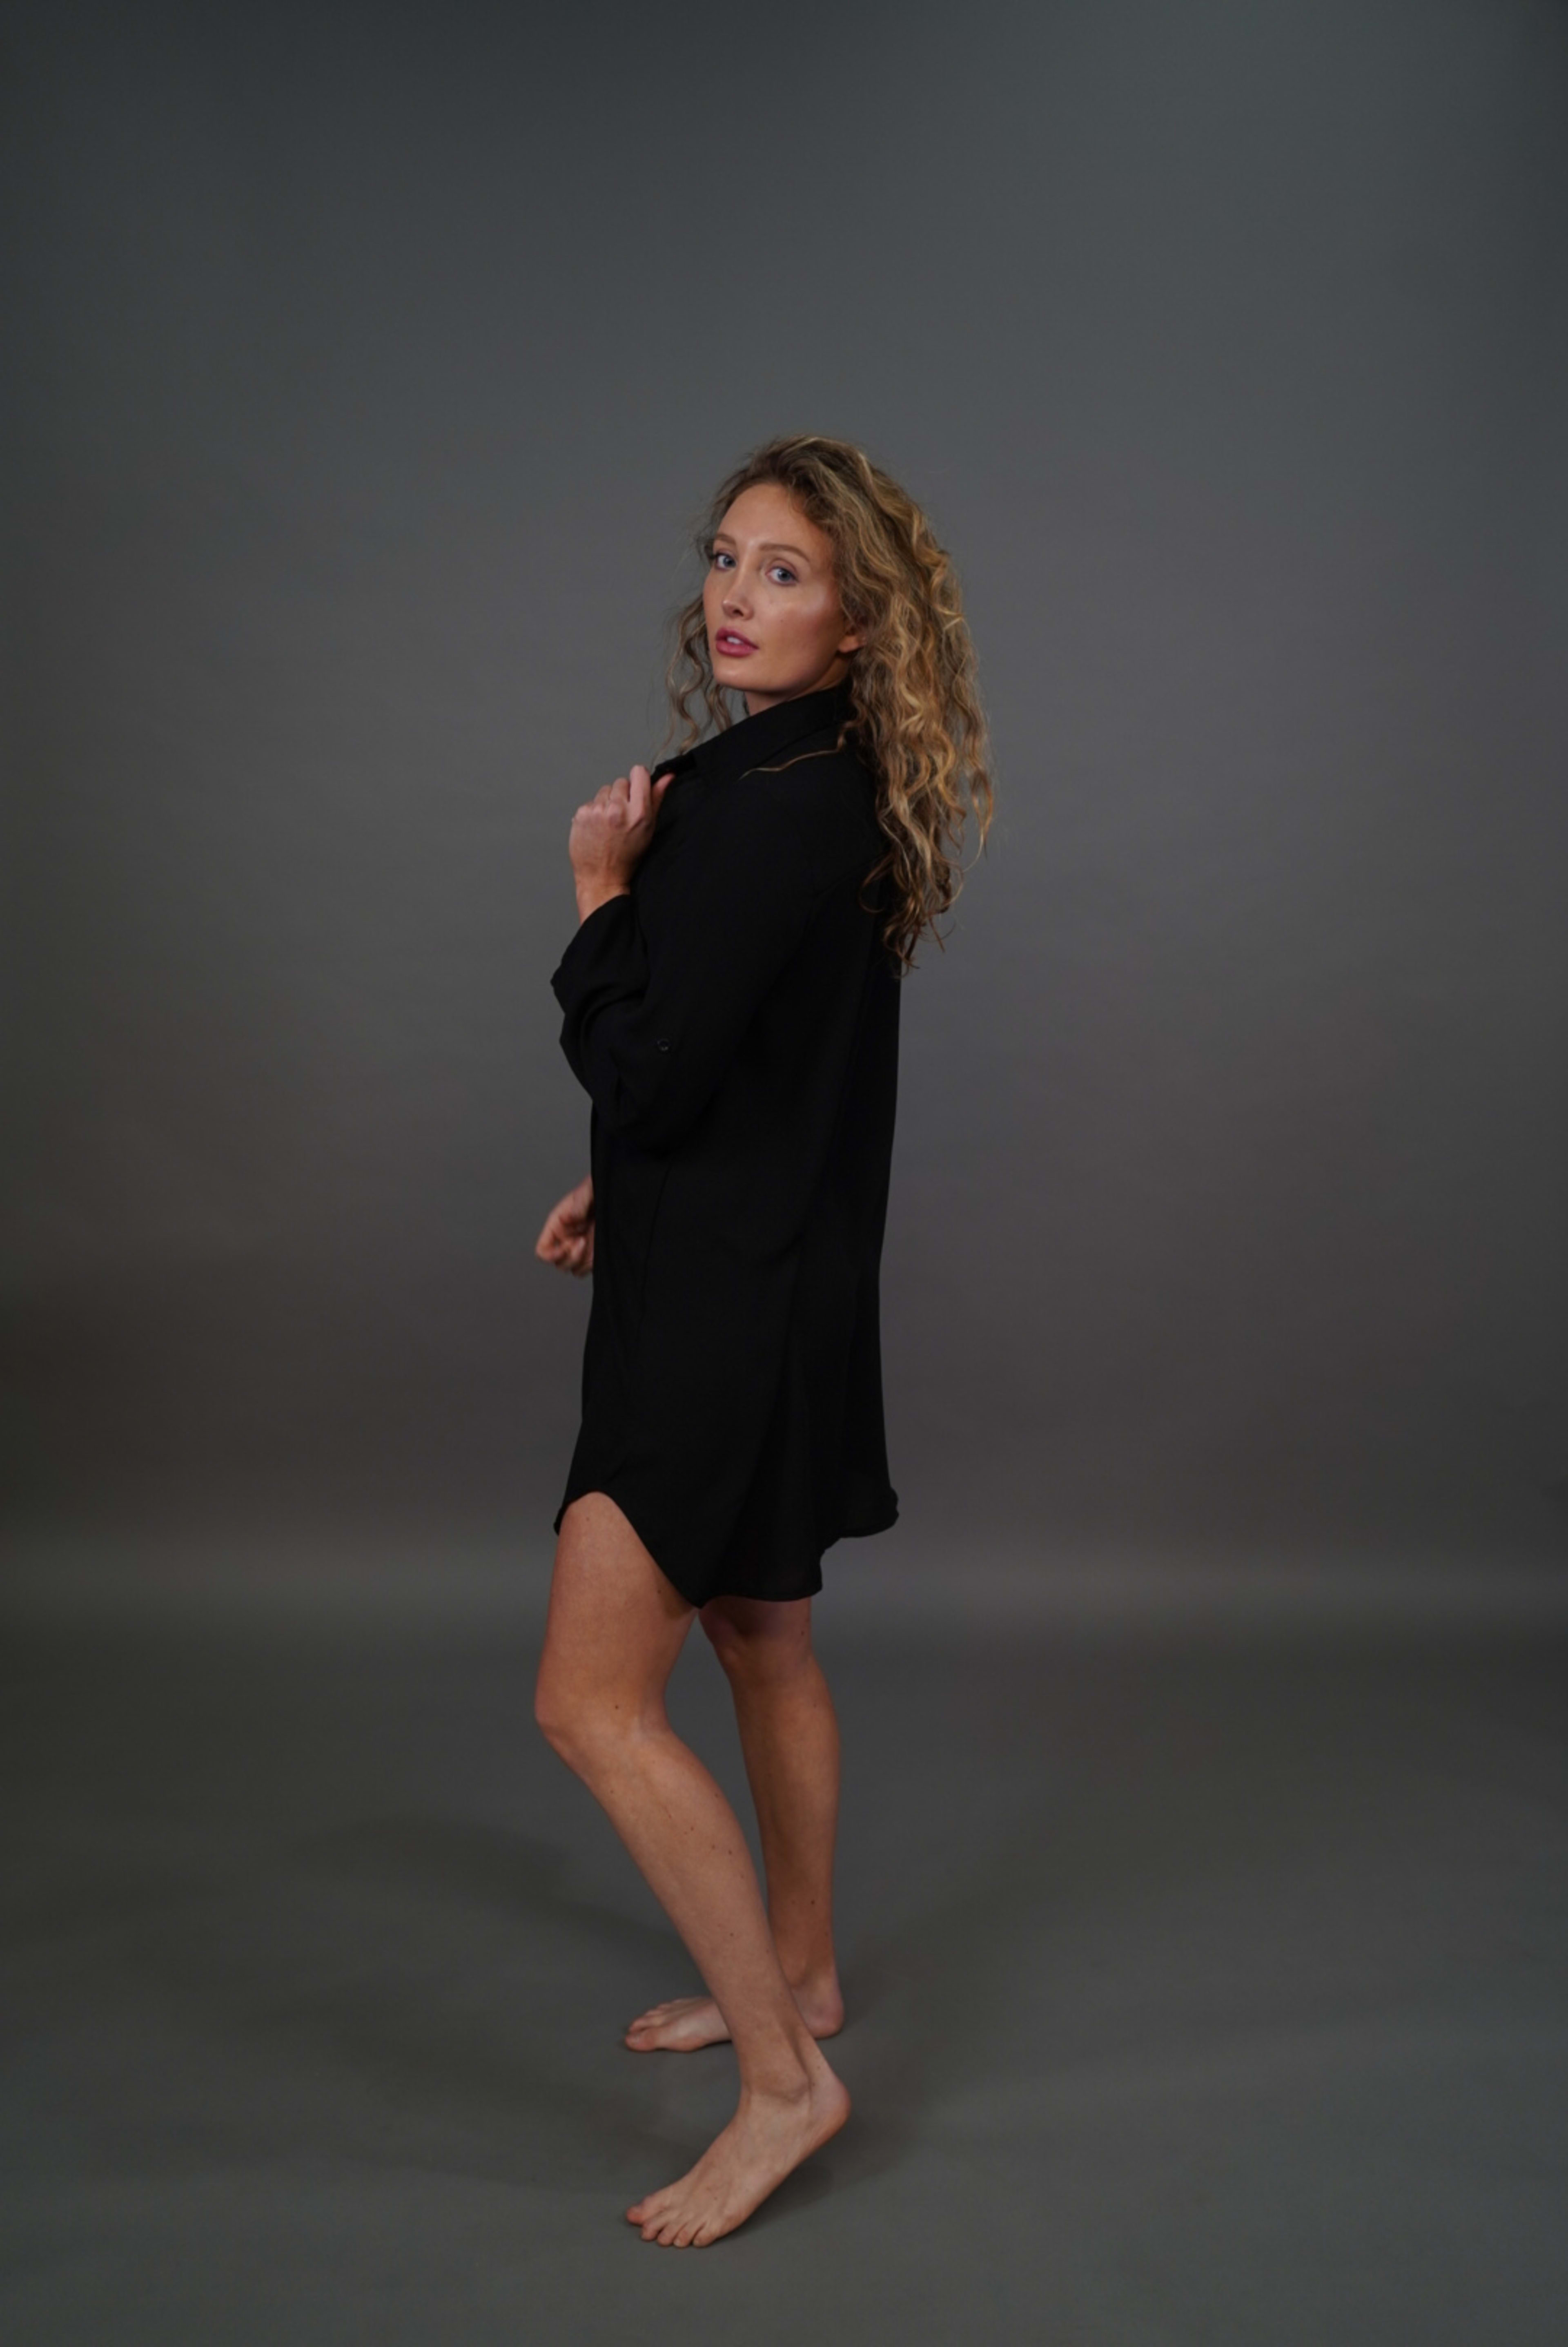 A woman in a long black shirt posing for a minimalist photoshoot.